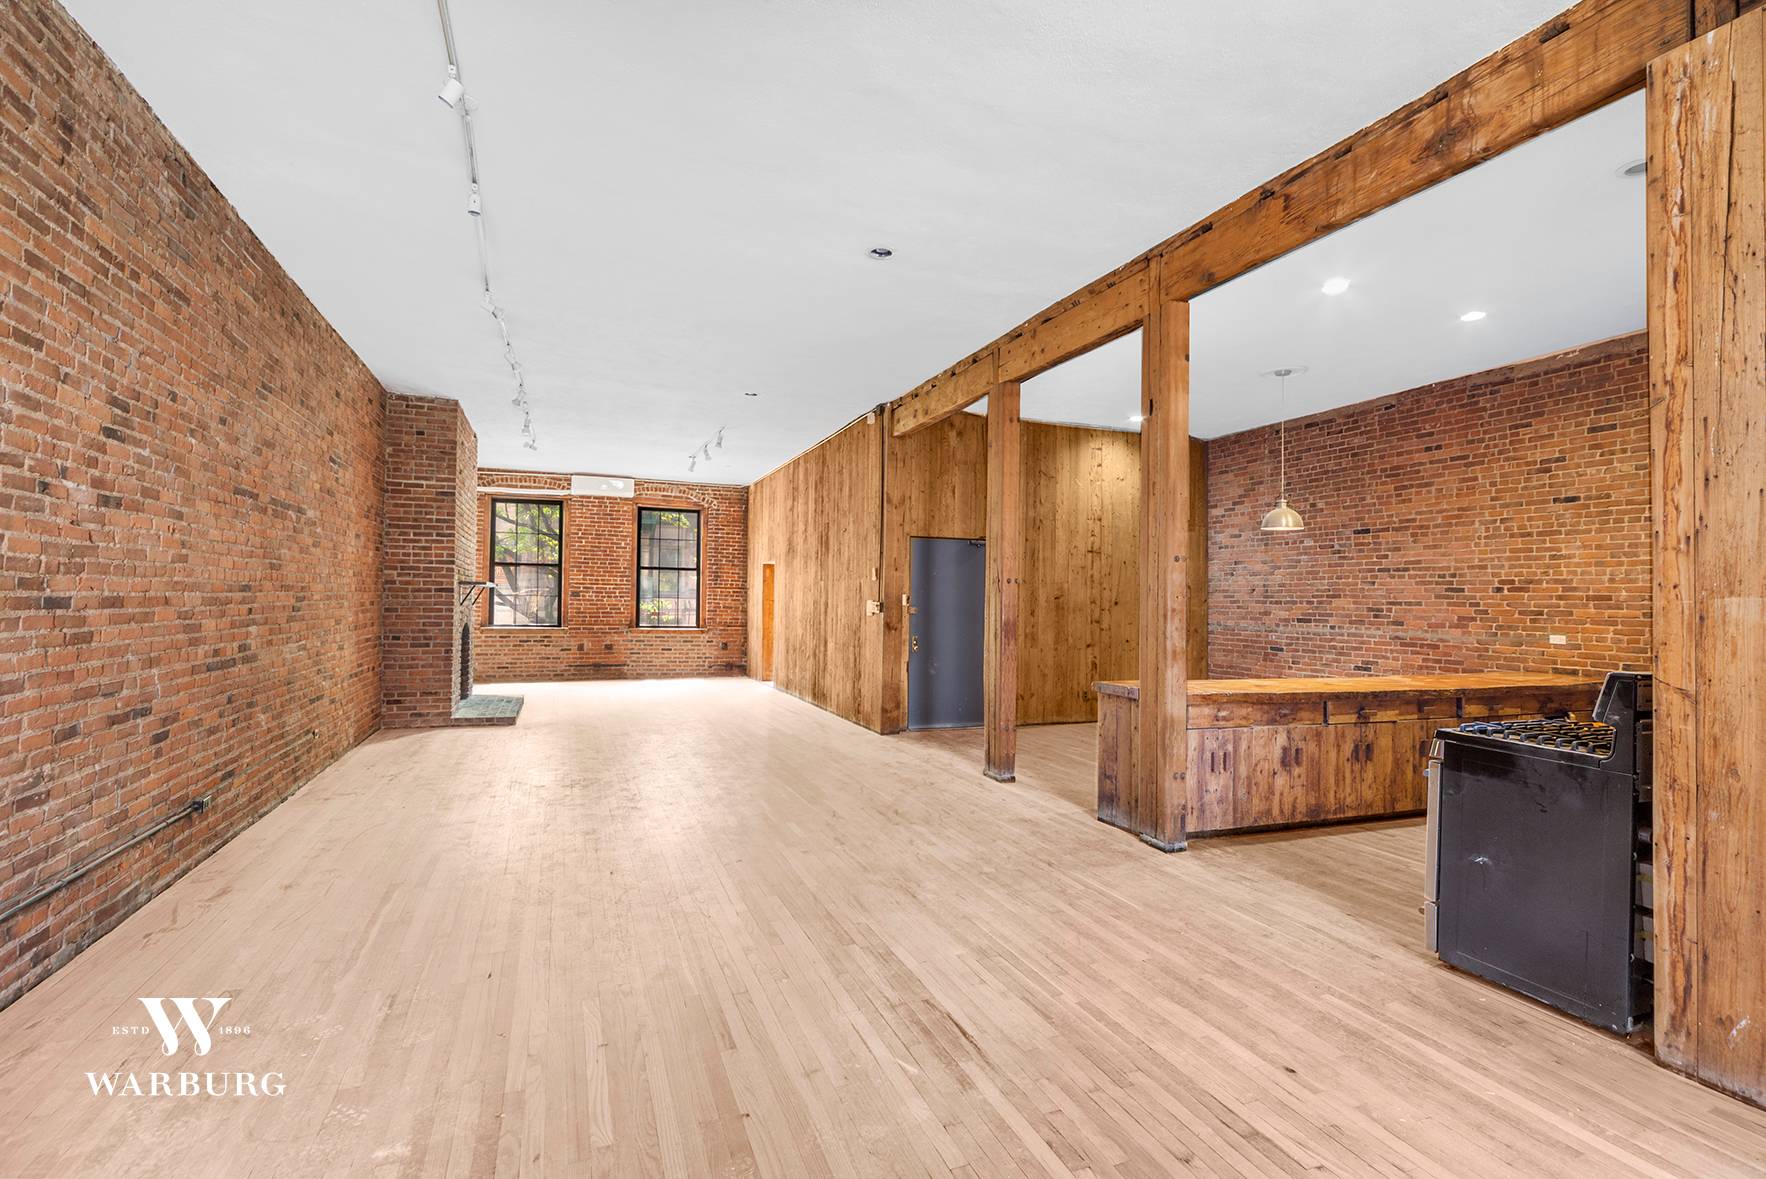 Rarely available live work or commercial space now on the market for rent on Saint Marks Place.